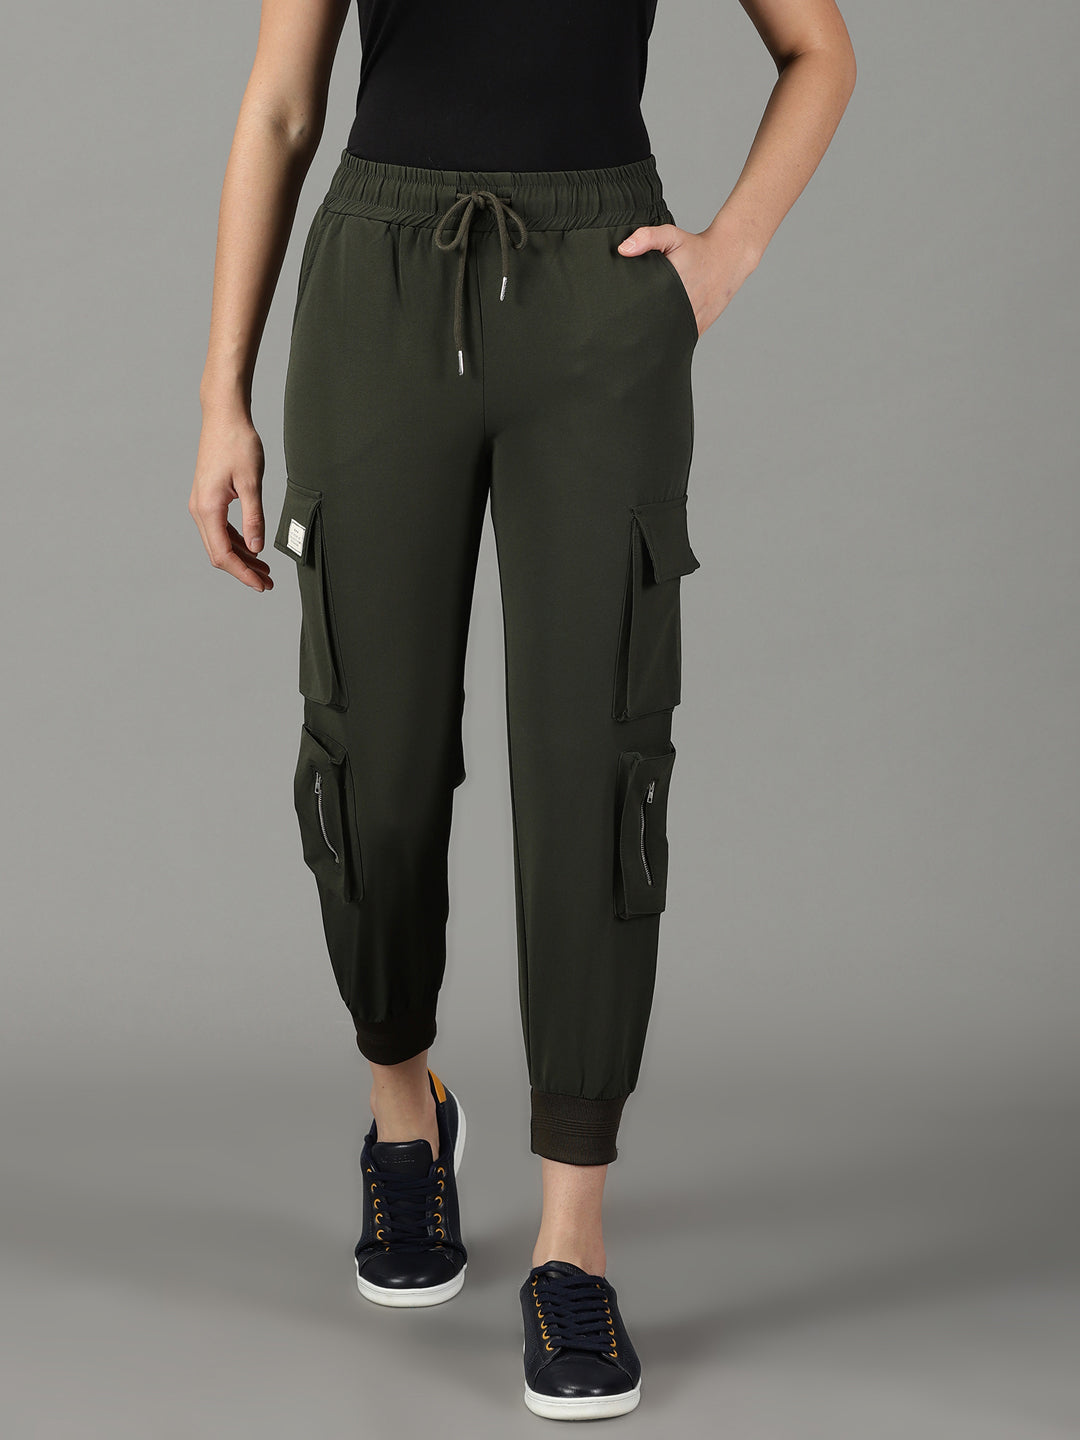 Women's Olive Solid Track Pant